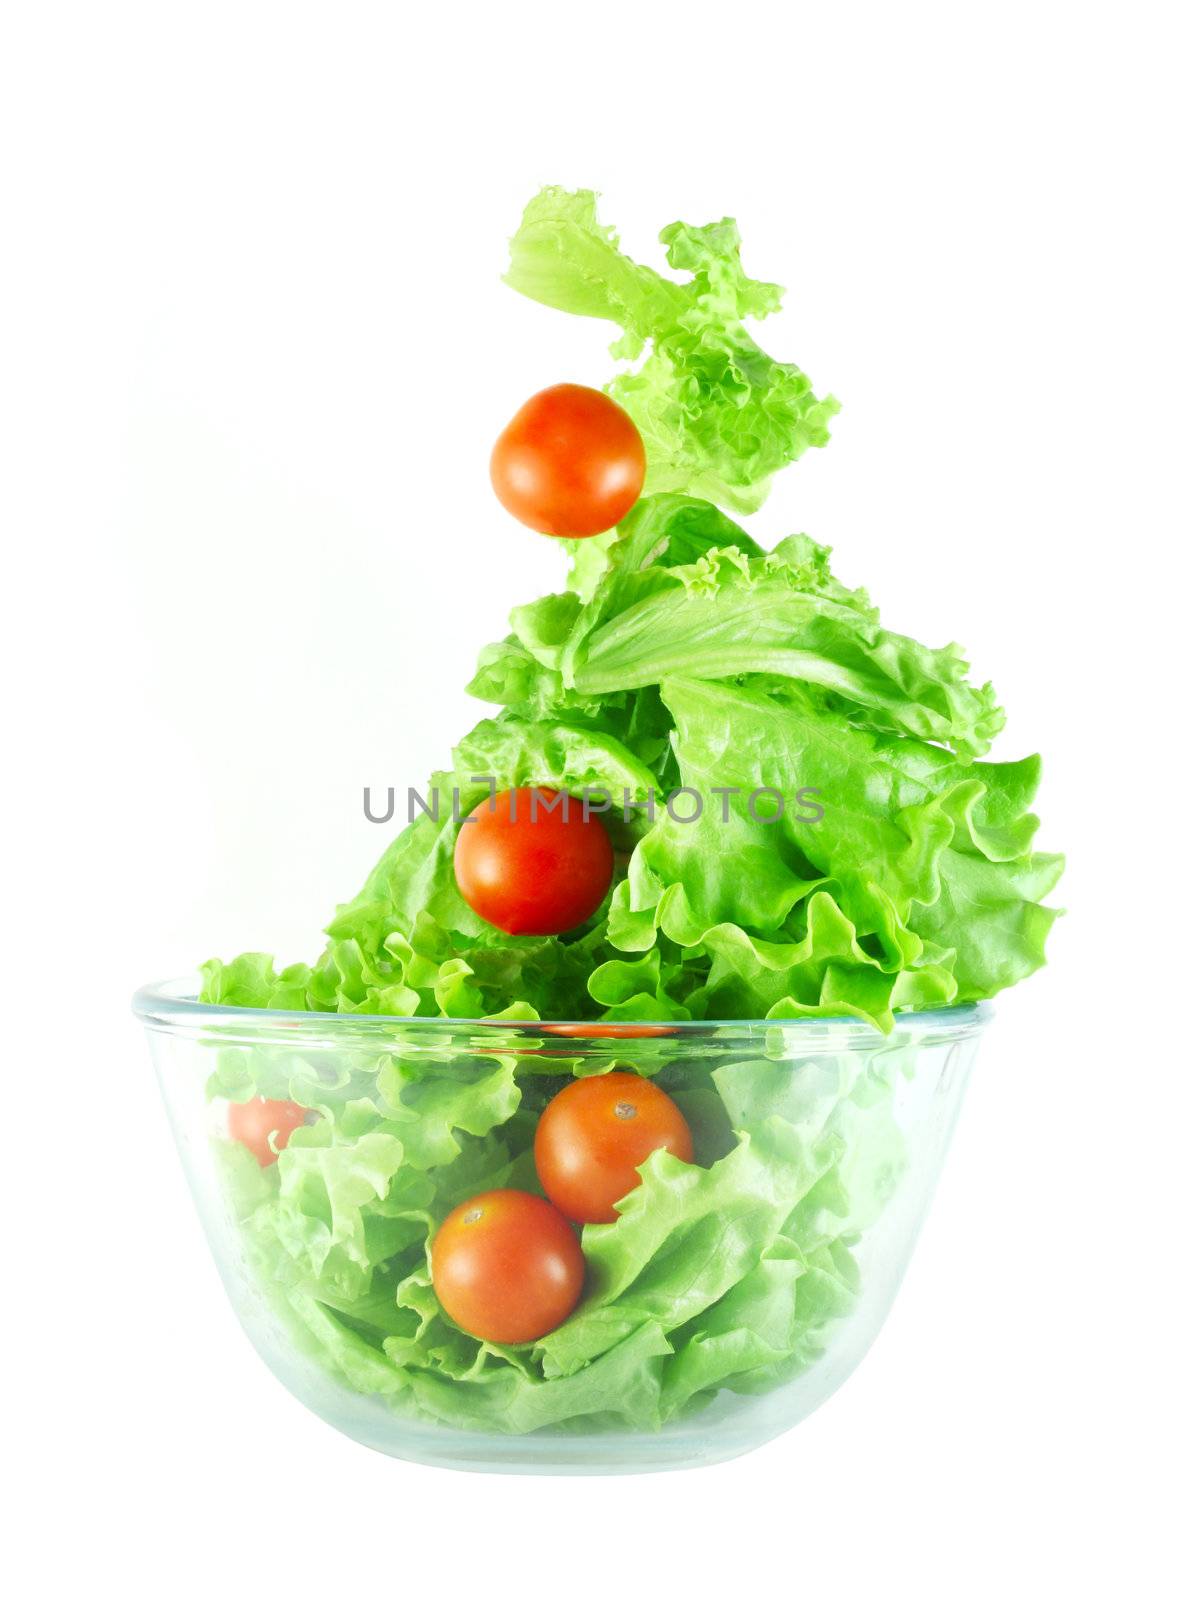  Light lettuce and cherry tomatoes salad in transparent bowl isolated on white lightness concept